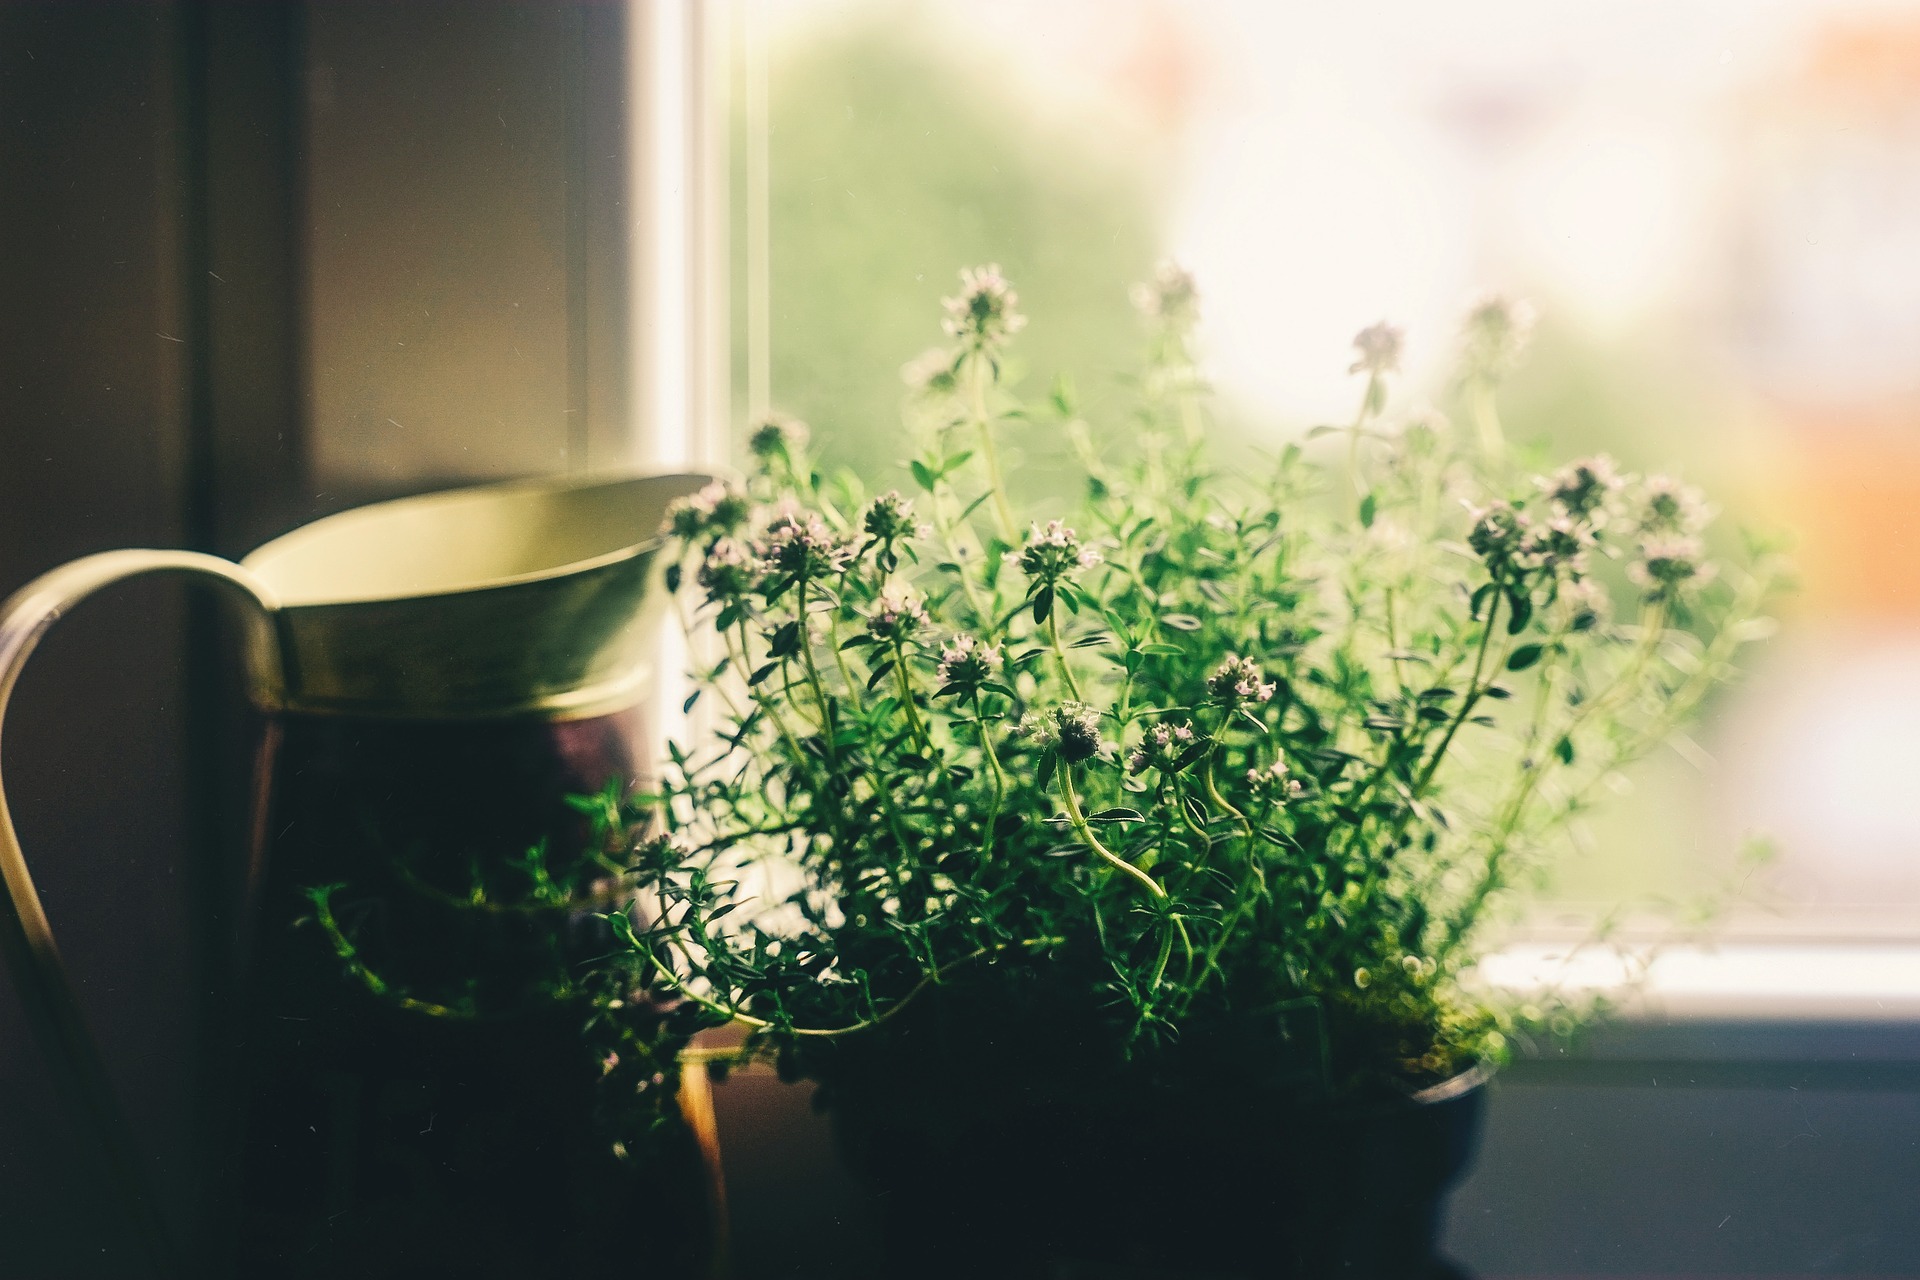 Window with herbs growing on the sill.